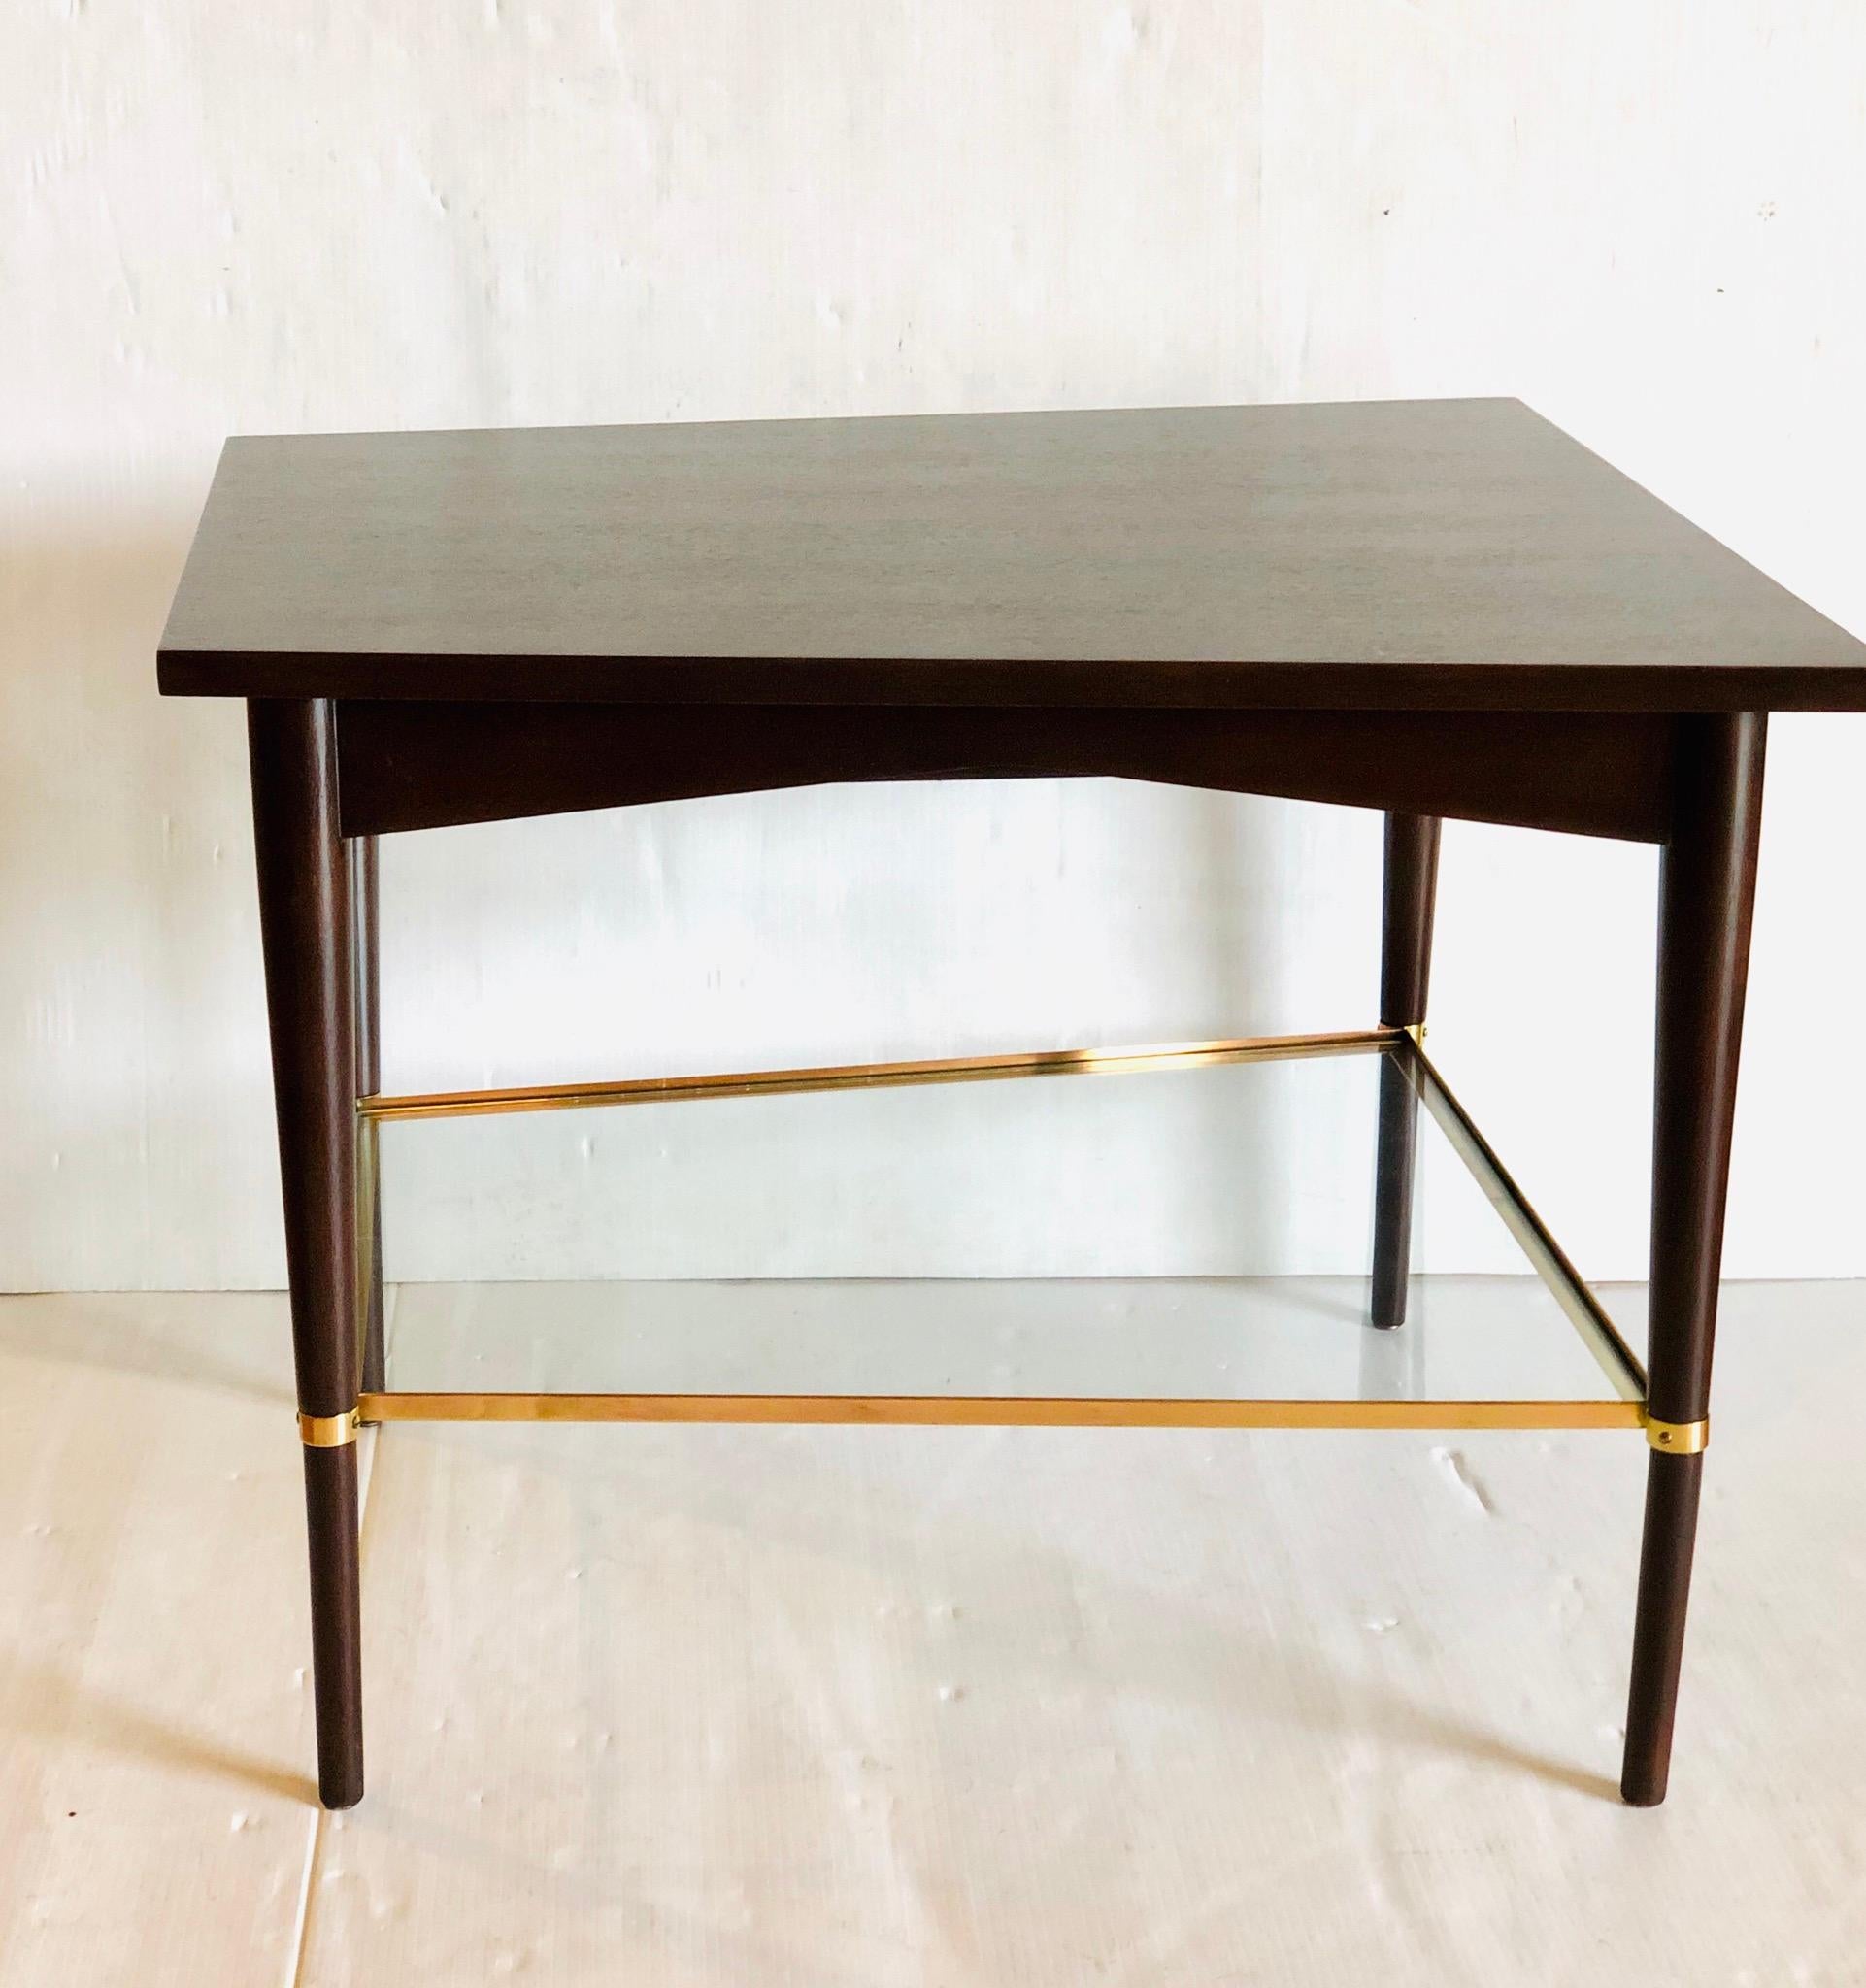 20th Century Midcentury Paul McCobb Wedge Table Mod.7014, Connoisseur Collection